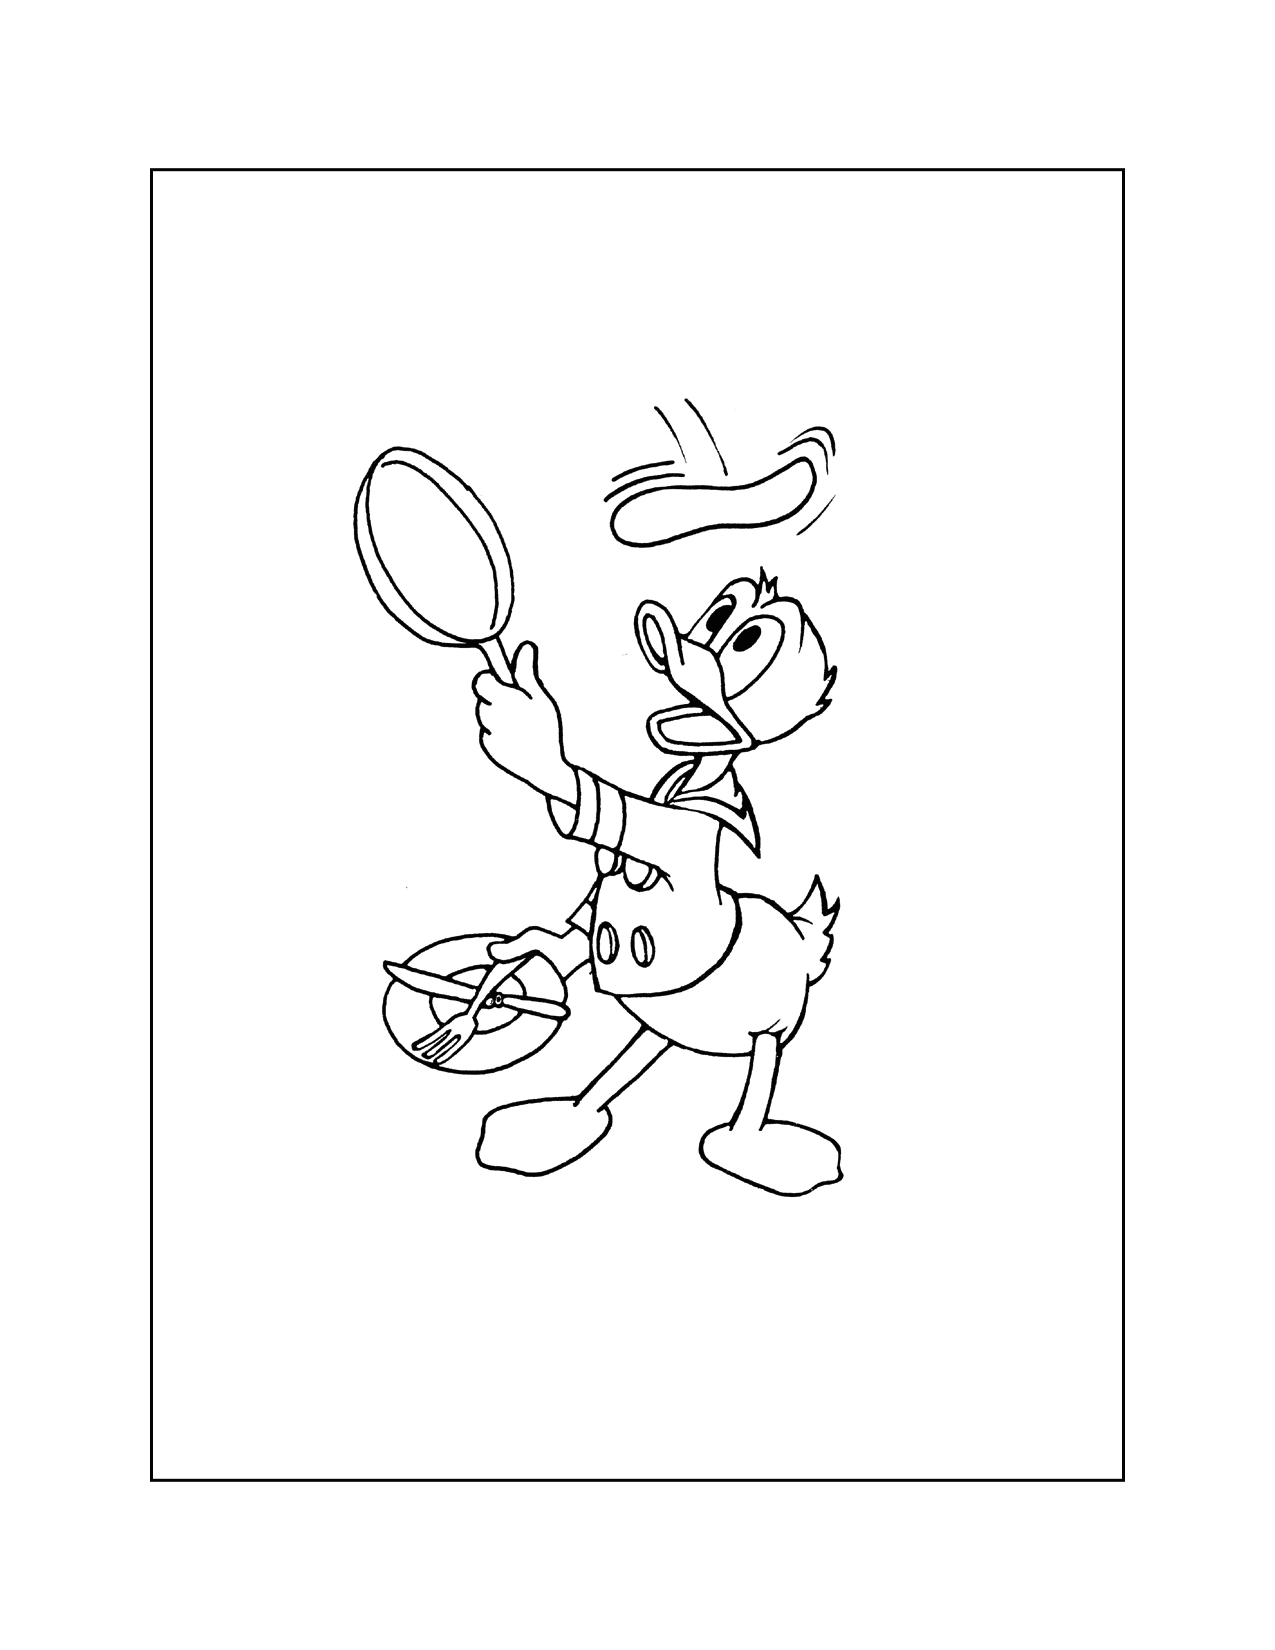 Donald Duck Flipping Pancakes Coloring Page